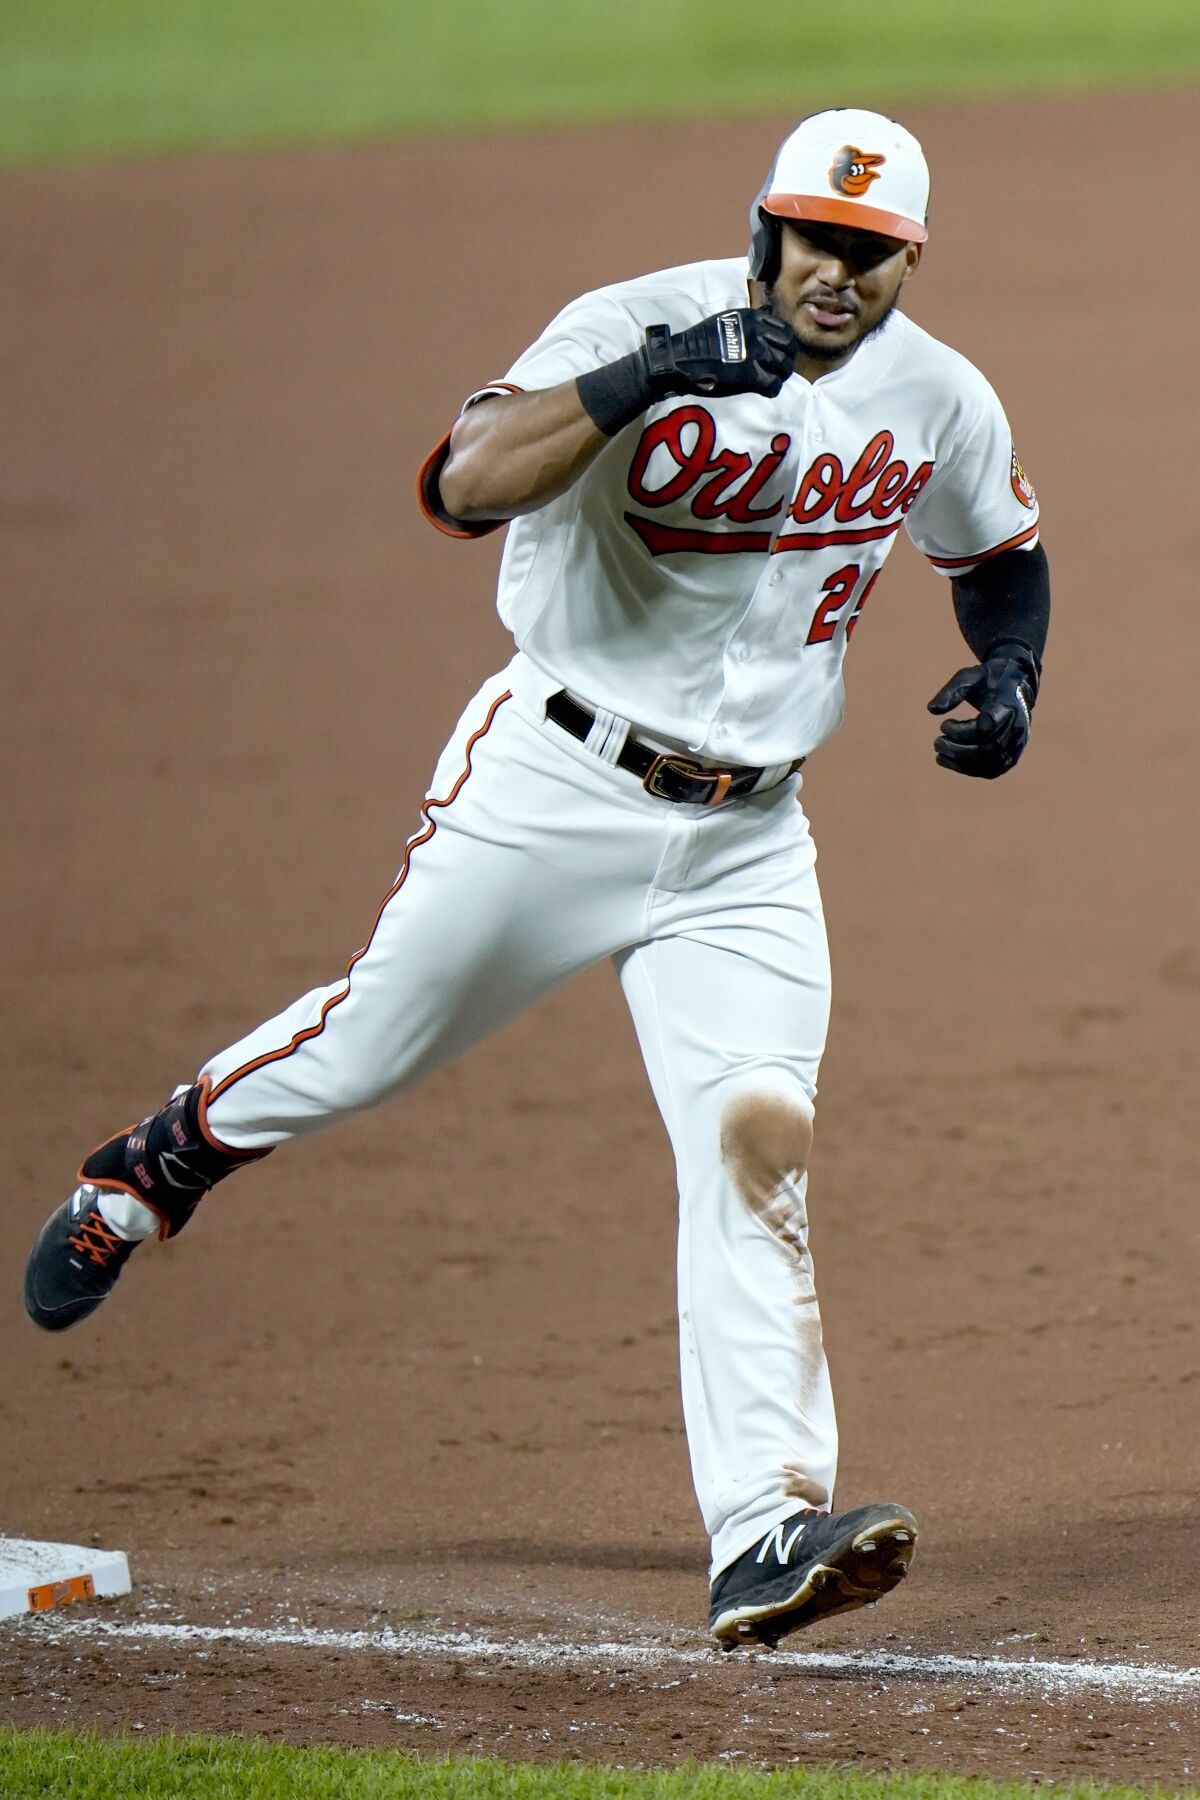 Baltimore Orioles' Anthony Santander reacts while running the bases after hitting a two-run home run off New York Mets relief pitcher Franklyn Kilome during the sixth inning of a baseball game, Tuesday, Sept. 1, 2020, in Baltimore. Orioles' Pat Valaika scored on the home run. (AP Photo/Julio Cortez)